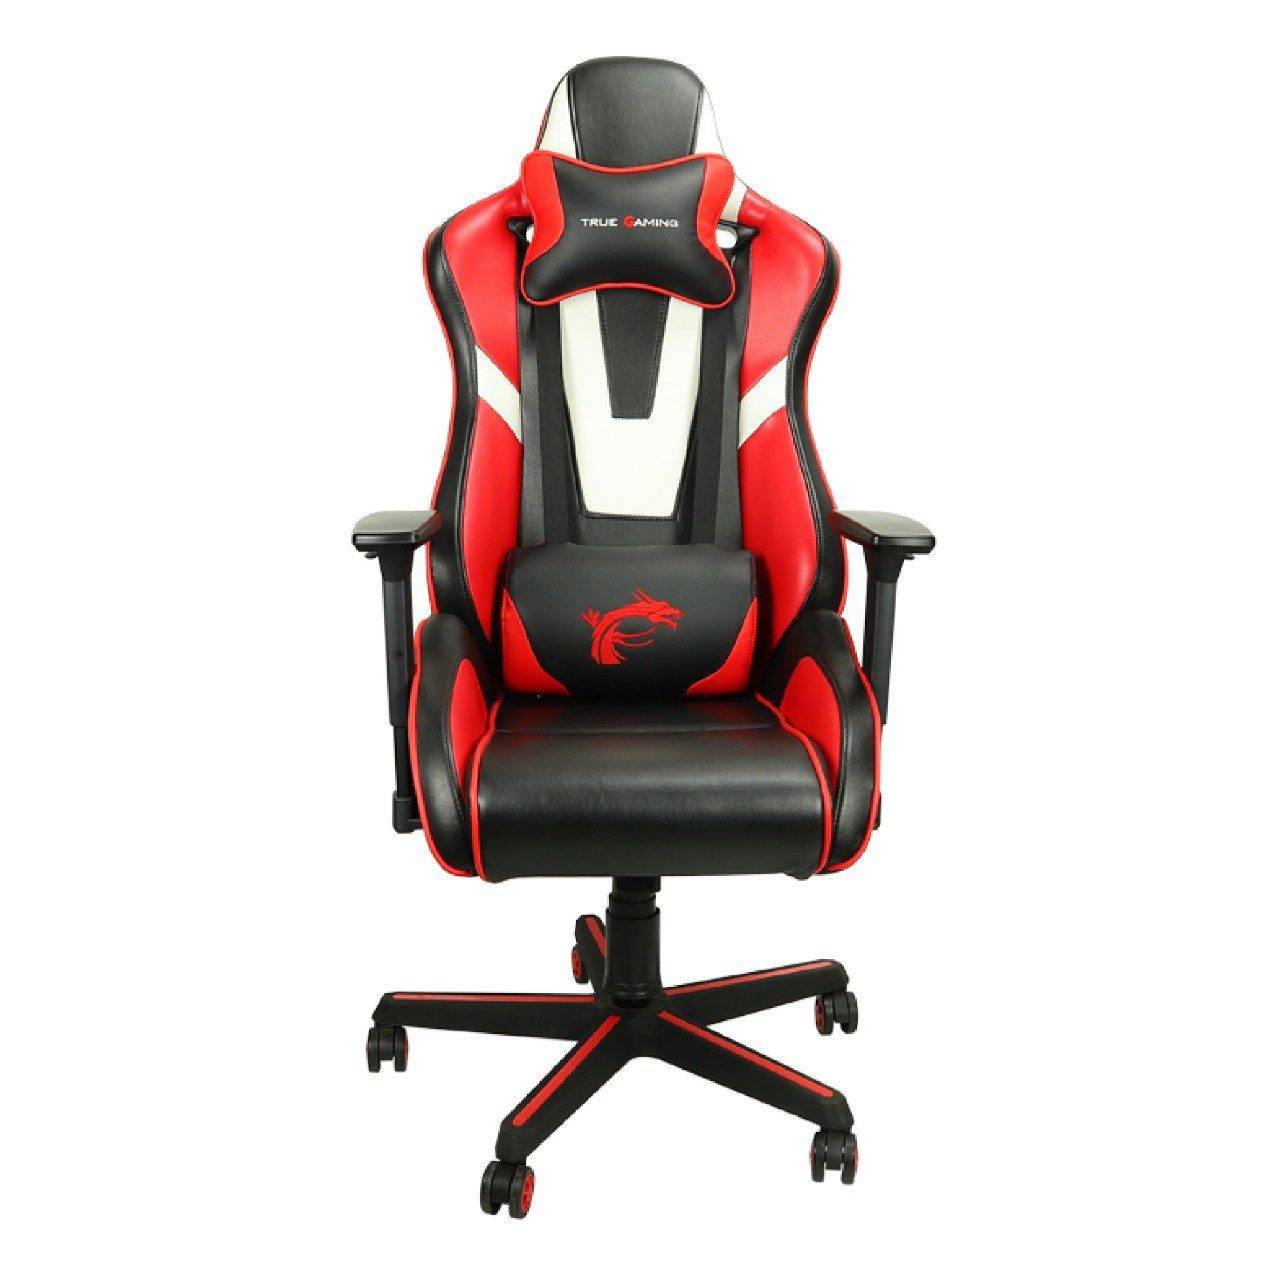 Red Gaming chair